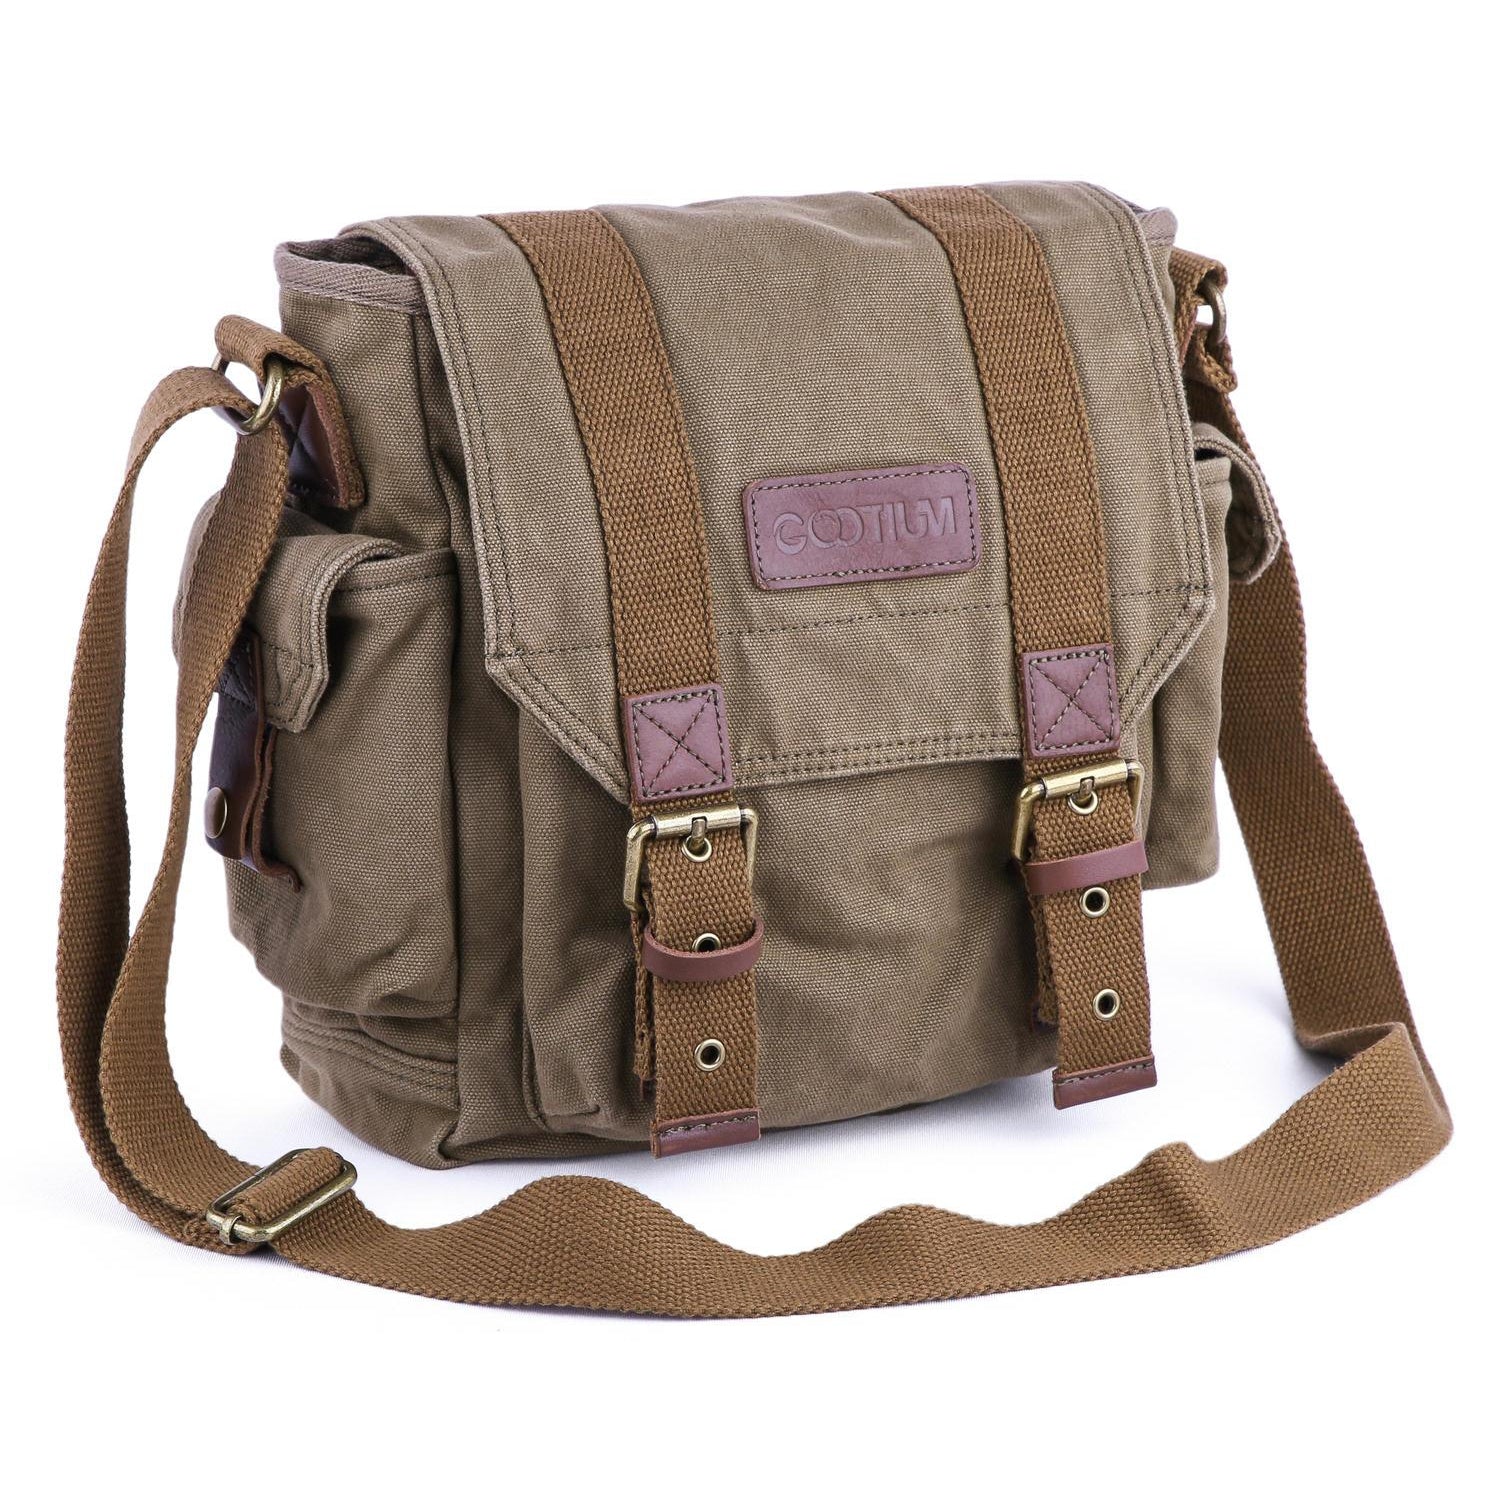 Satopradhan Eco-friendly Cotton Sling Bag at low price | Shop Now!